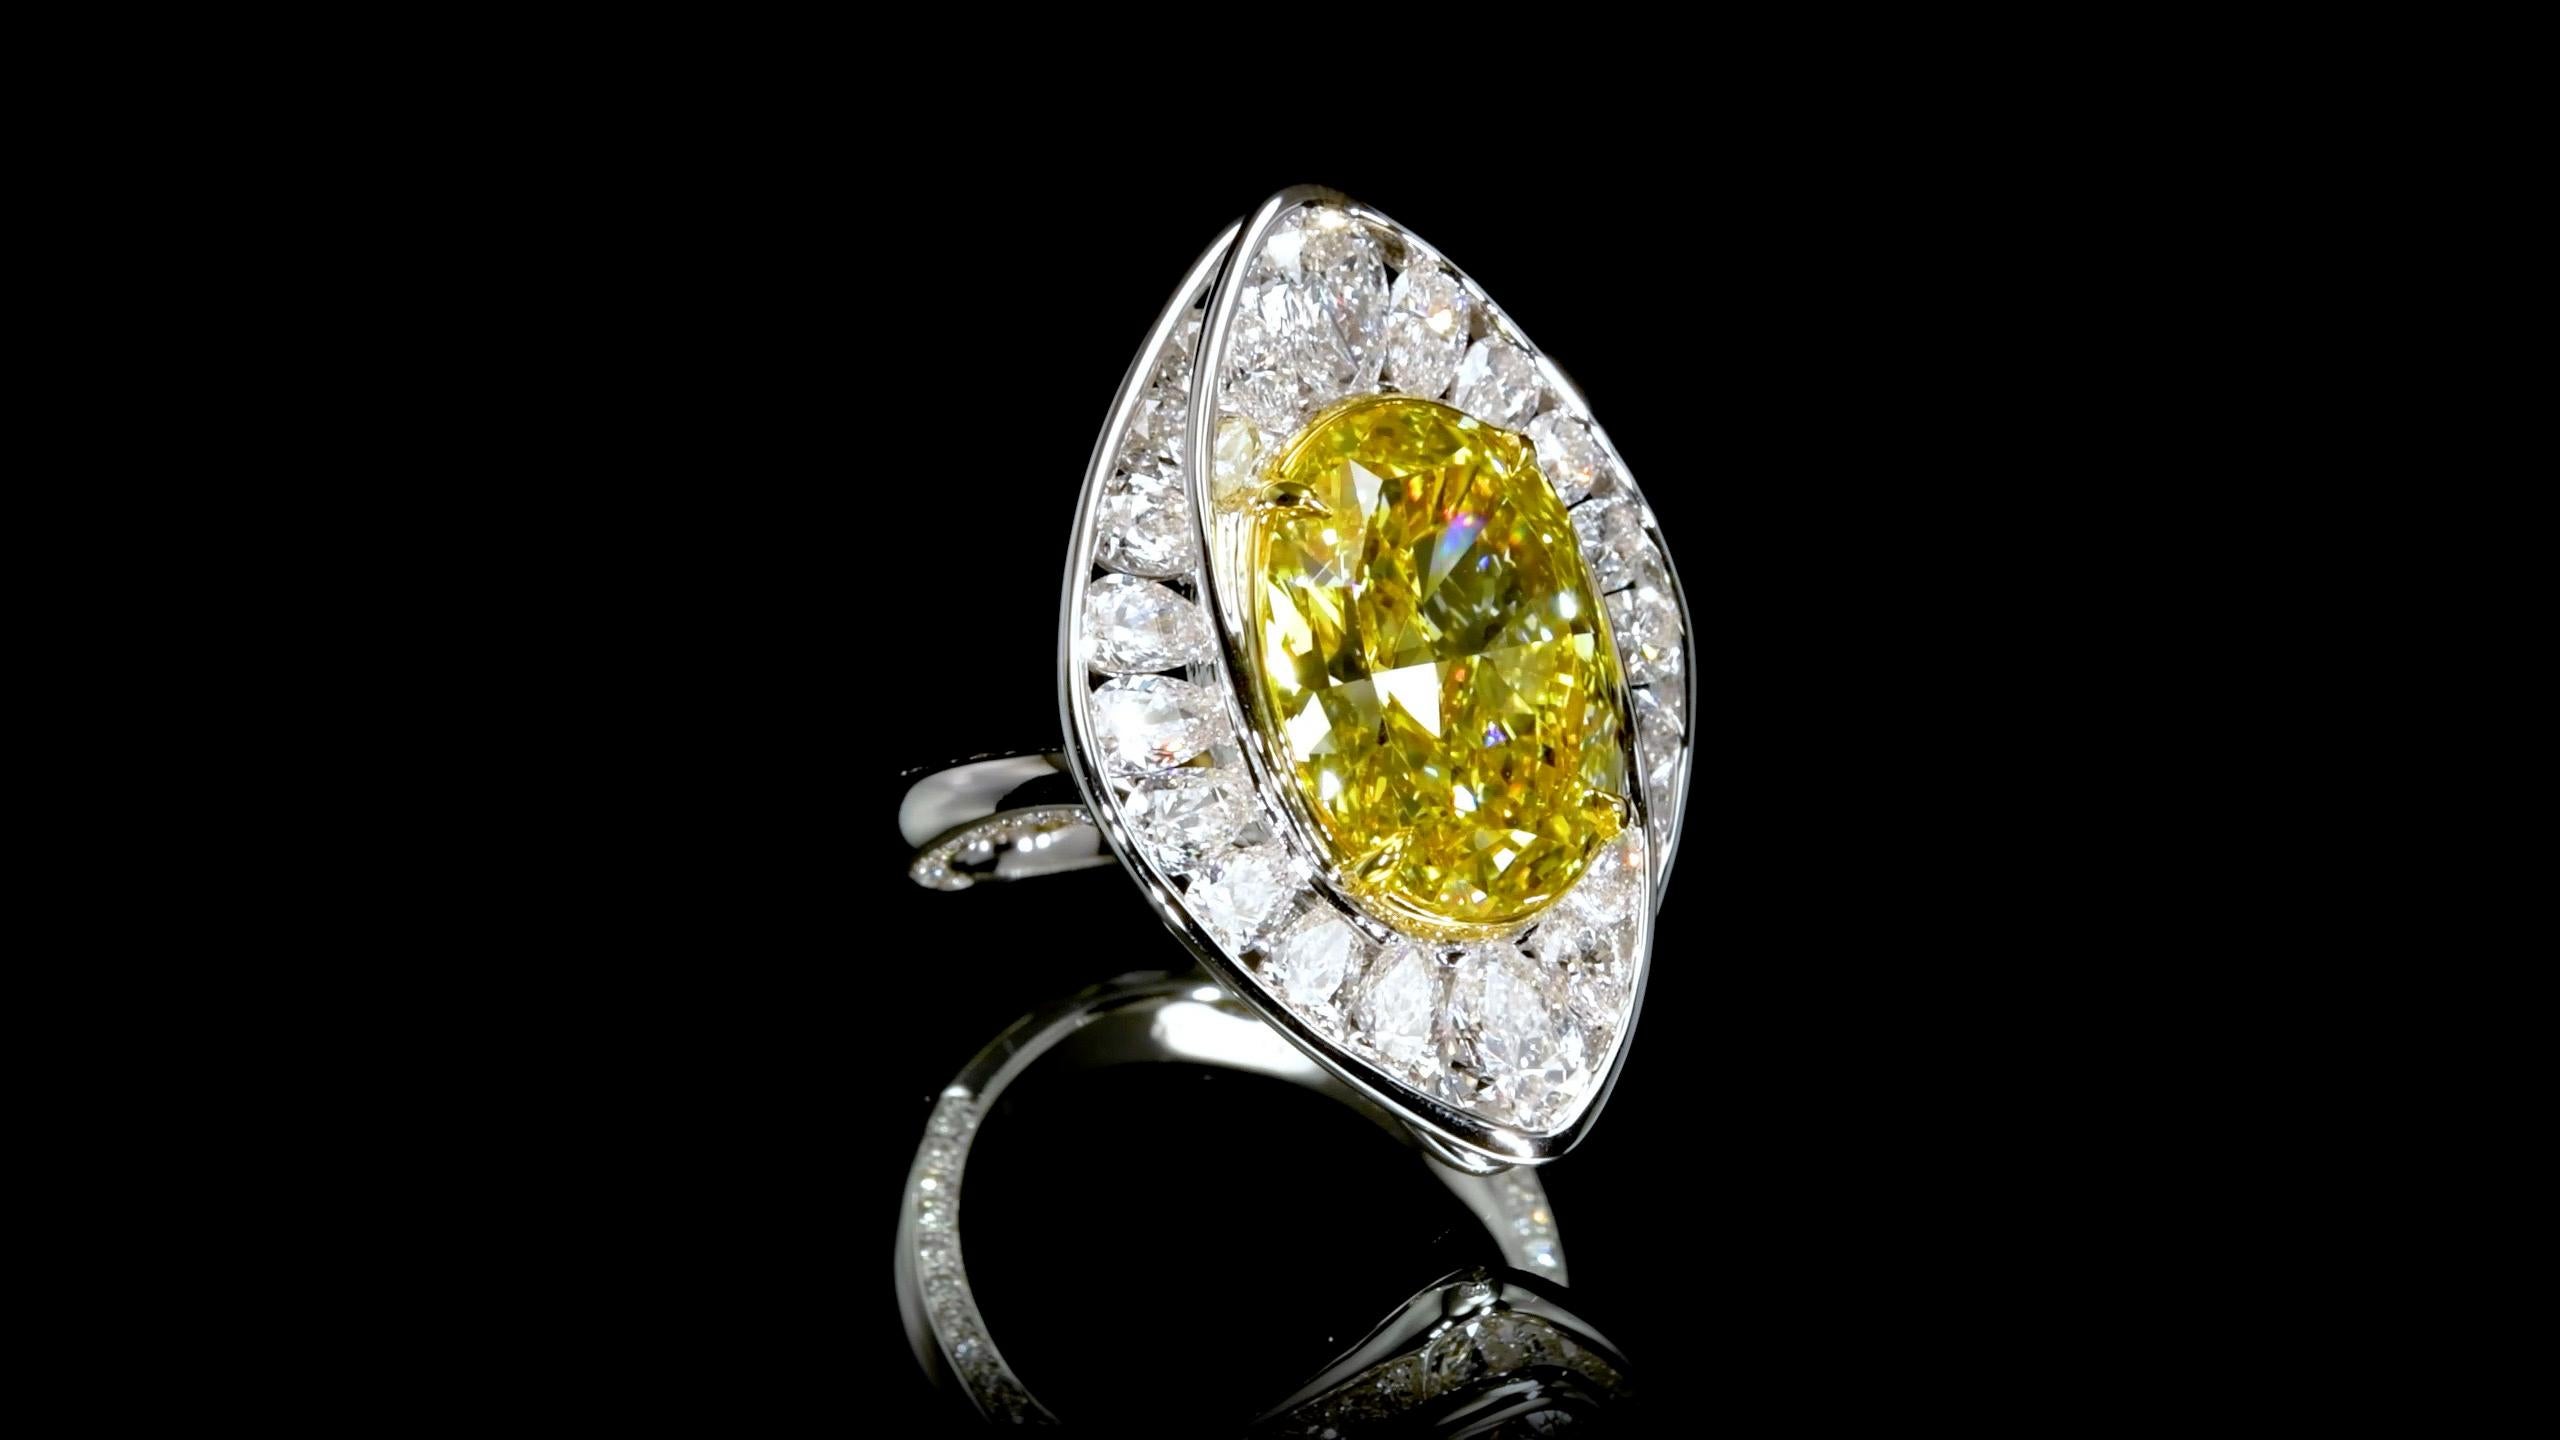 From Emilio Jewelry, a well known and respected wholesaler/dealer located on New York’s iconic Fifth Avenue, 
In the center: A Majestic most rich vibrant Gia Certified Natural Fancy Deep Yellow diamond stuns from miles away. Set with an array of D-F